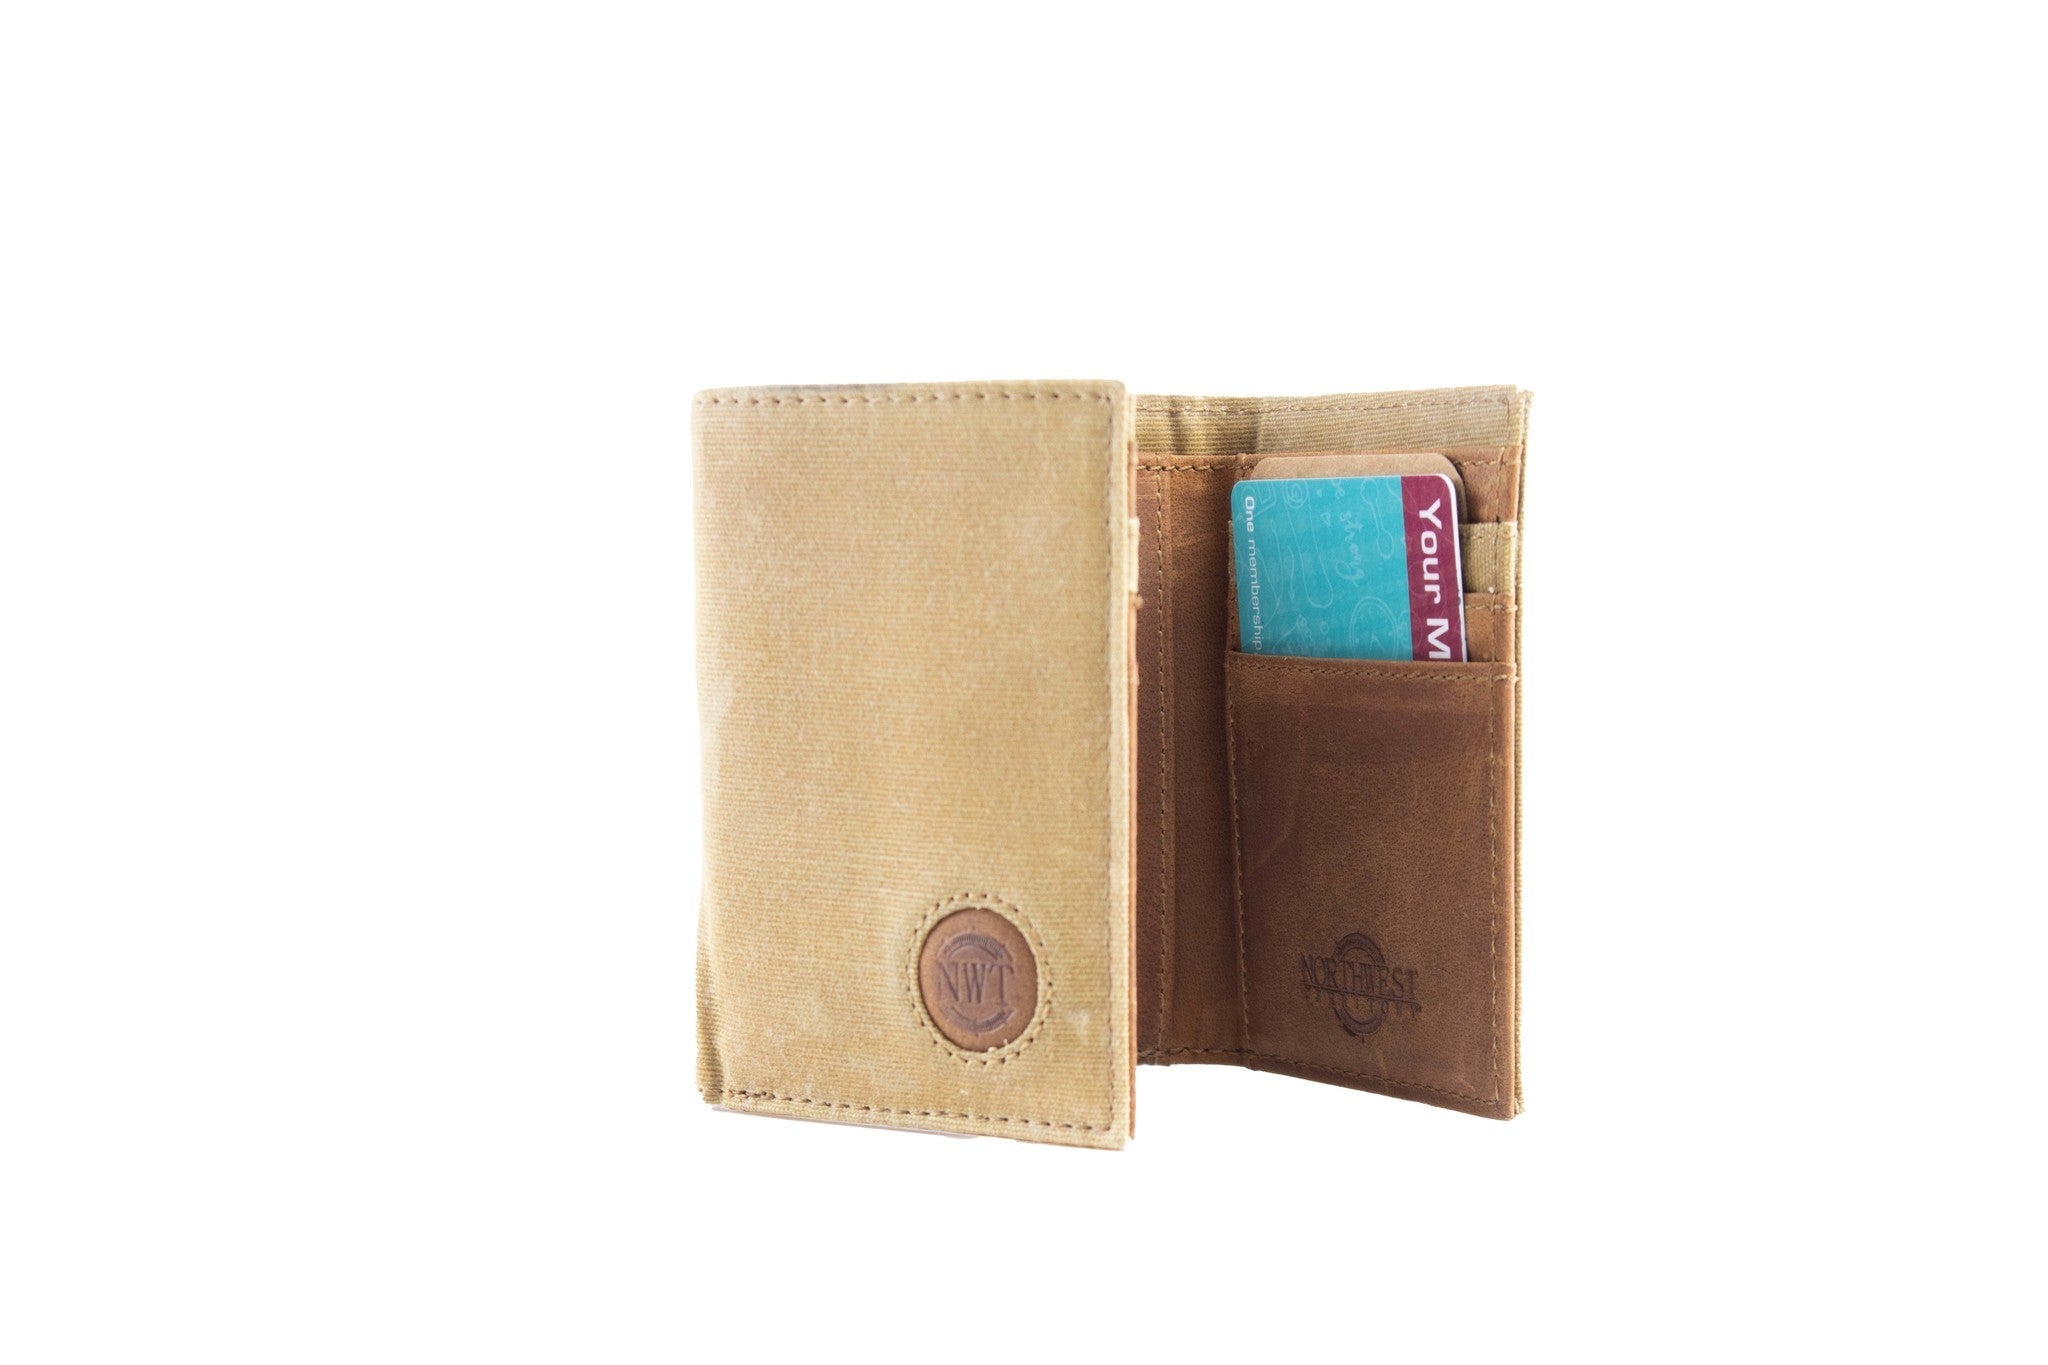 Patrick Multi Function Trifold Wallet